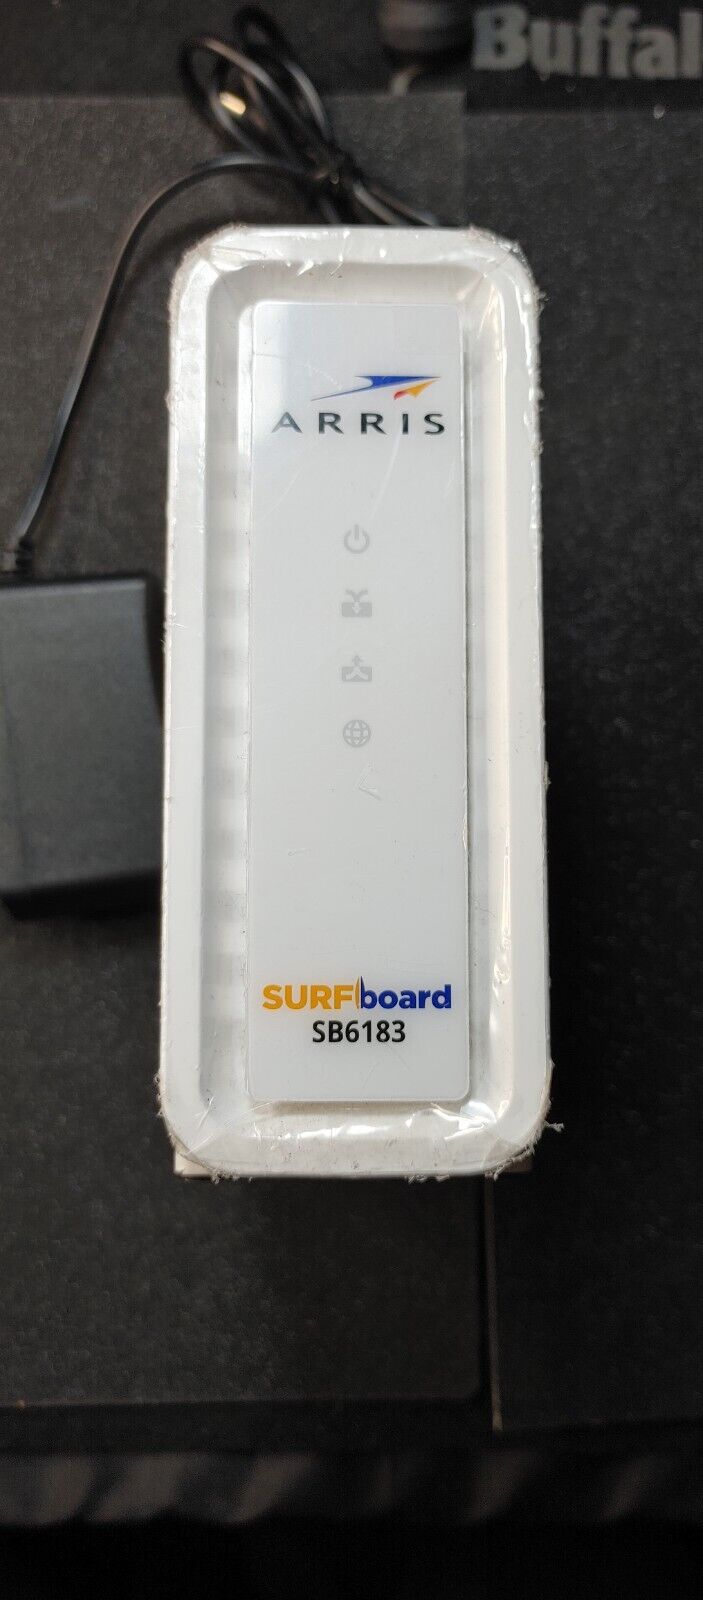 ARRIS SB6183 686 Mbps Cable Modem, White - 59243200300 Refurbished But Still New